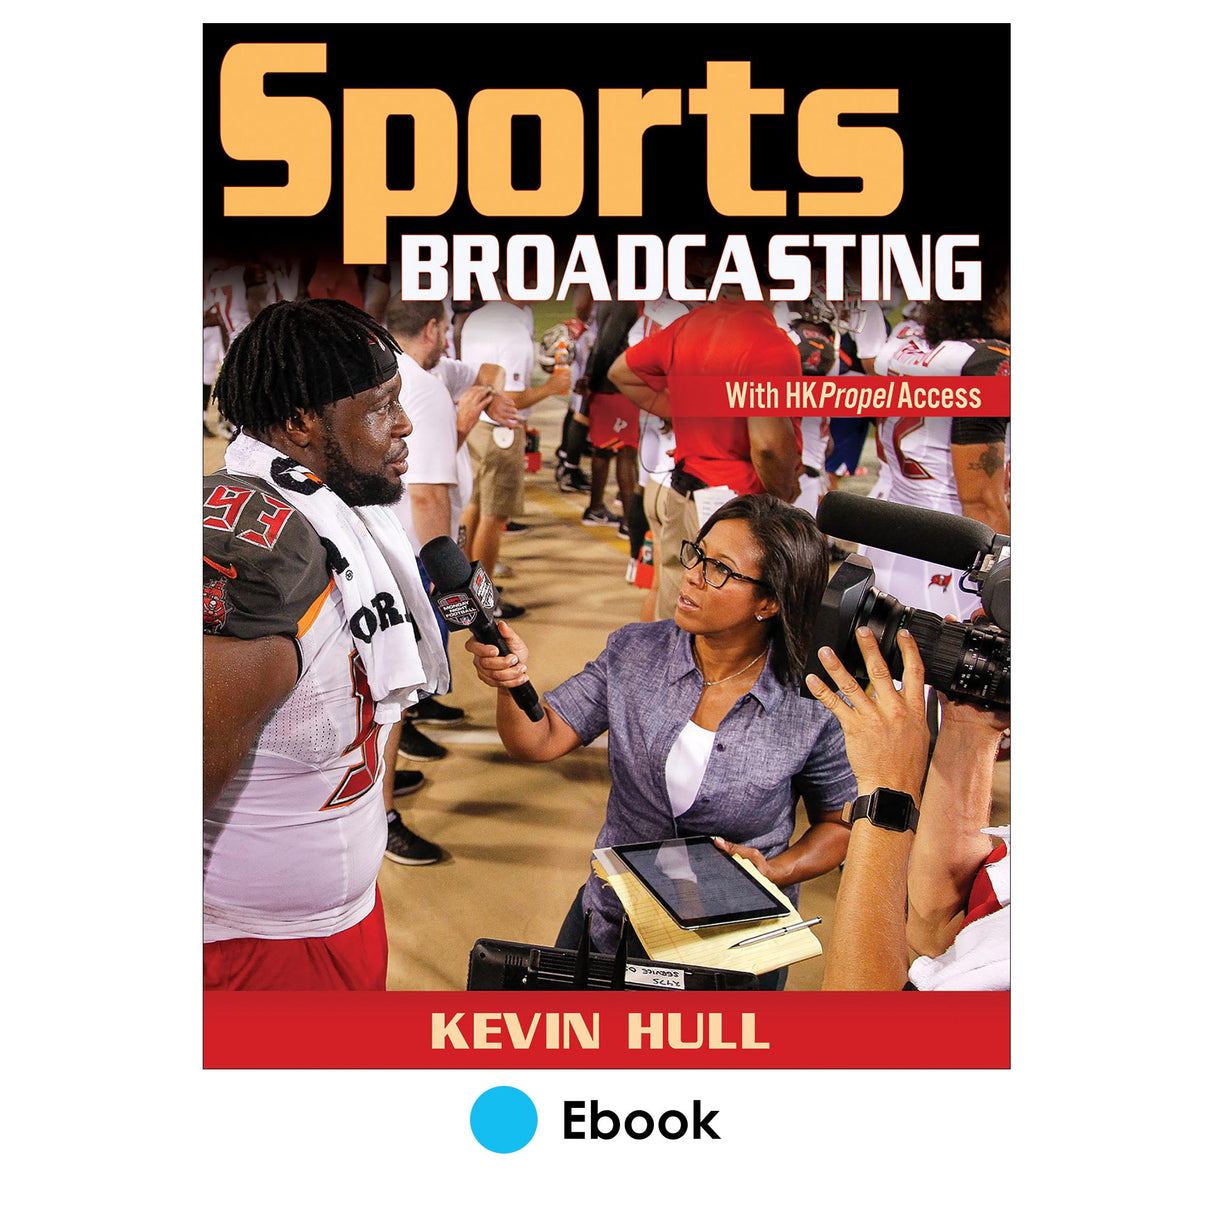 Sports Broadcasting Ebook With HKPropel Access